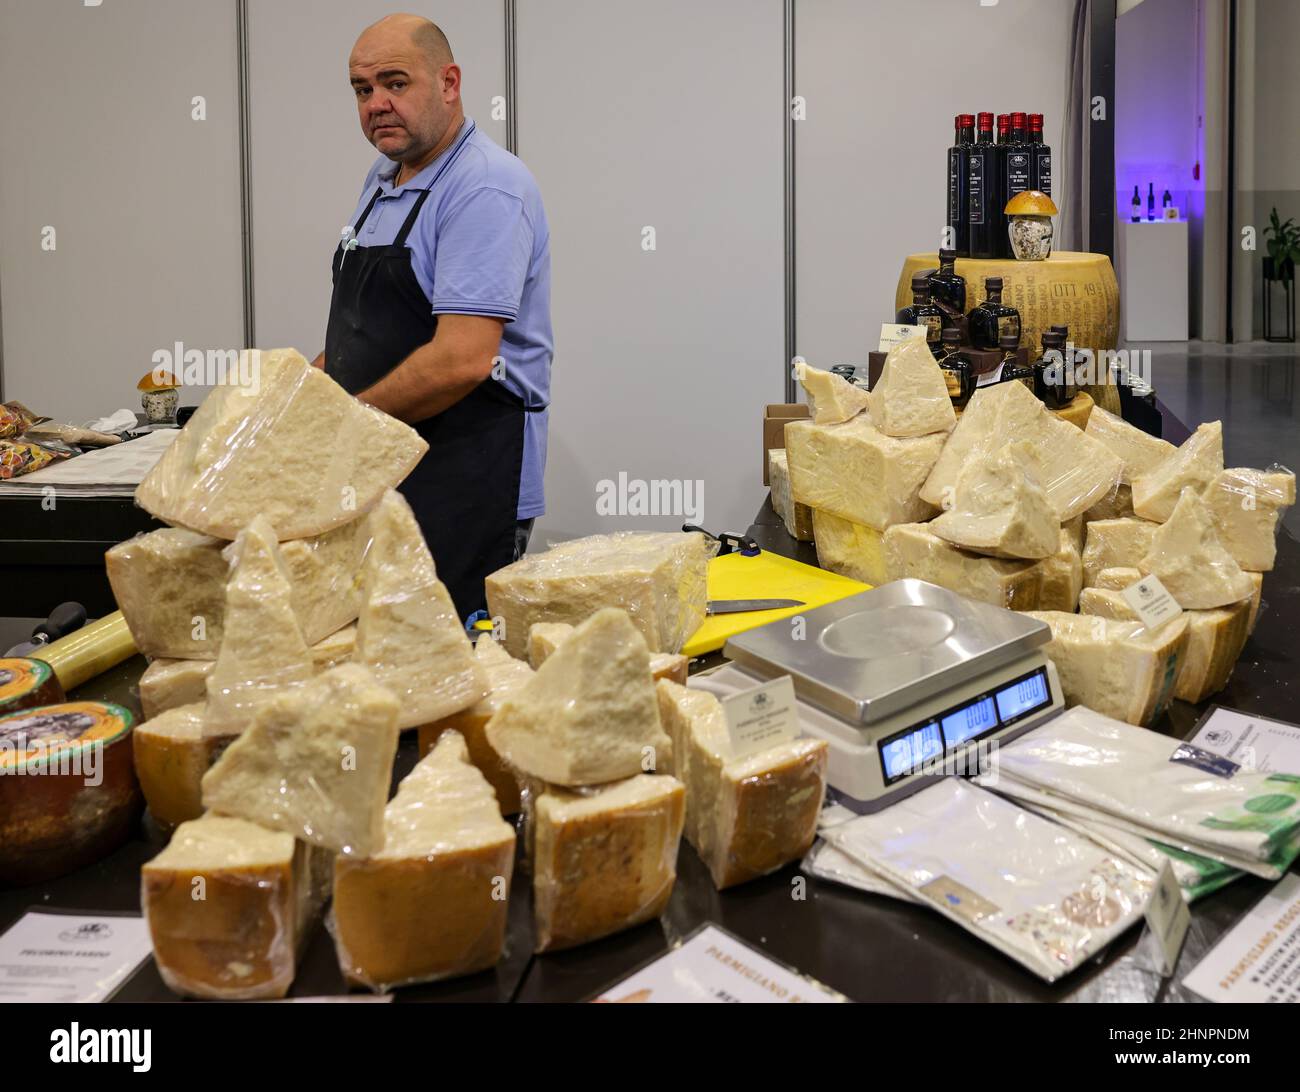 Parmigiano Reggiano cheese at Enoexpo and Gastrofood - Trade Fair for Food and Drinks for Catering Stock Photo